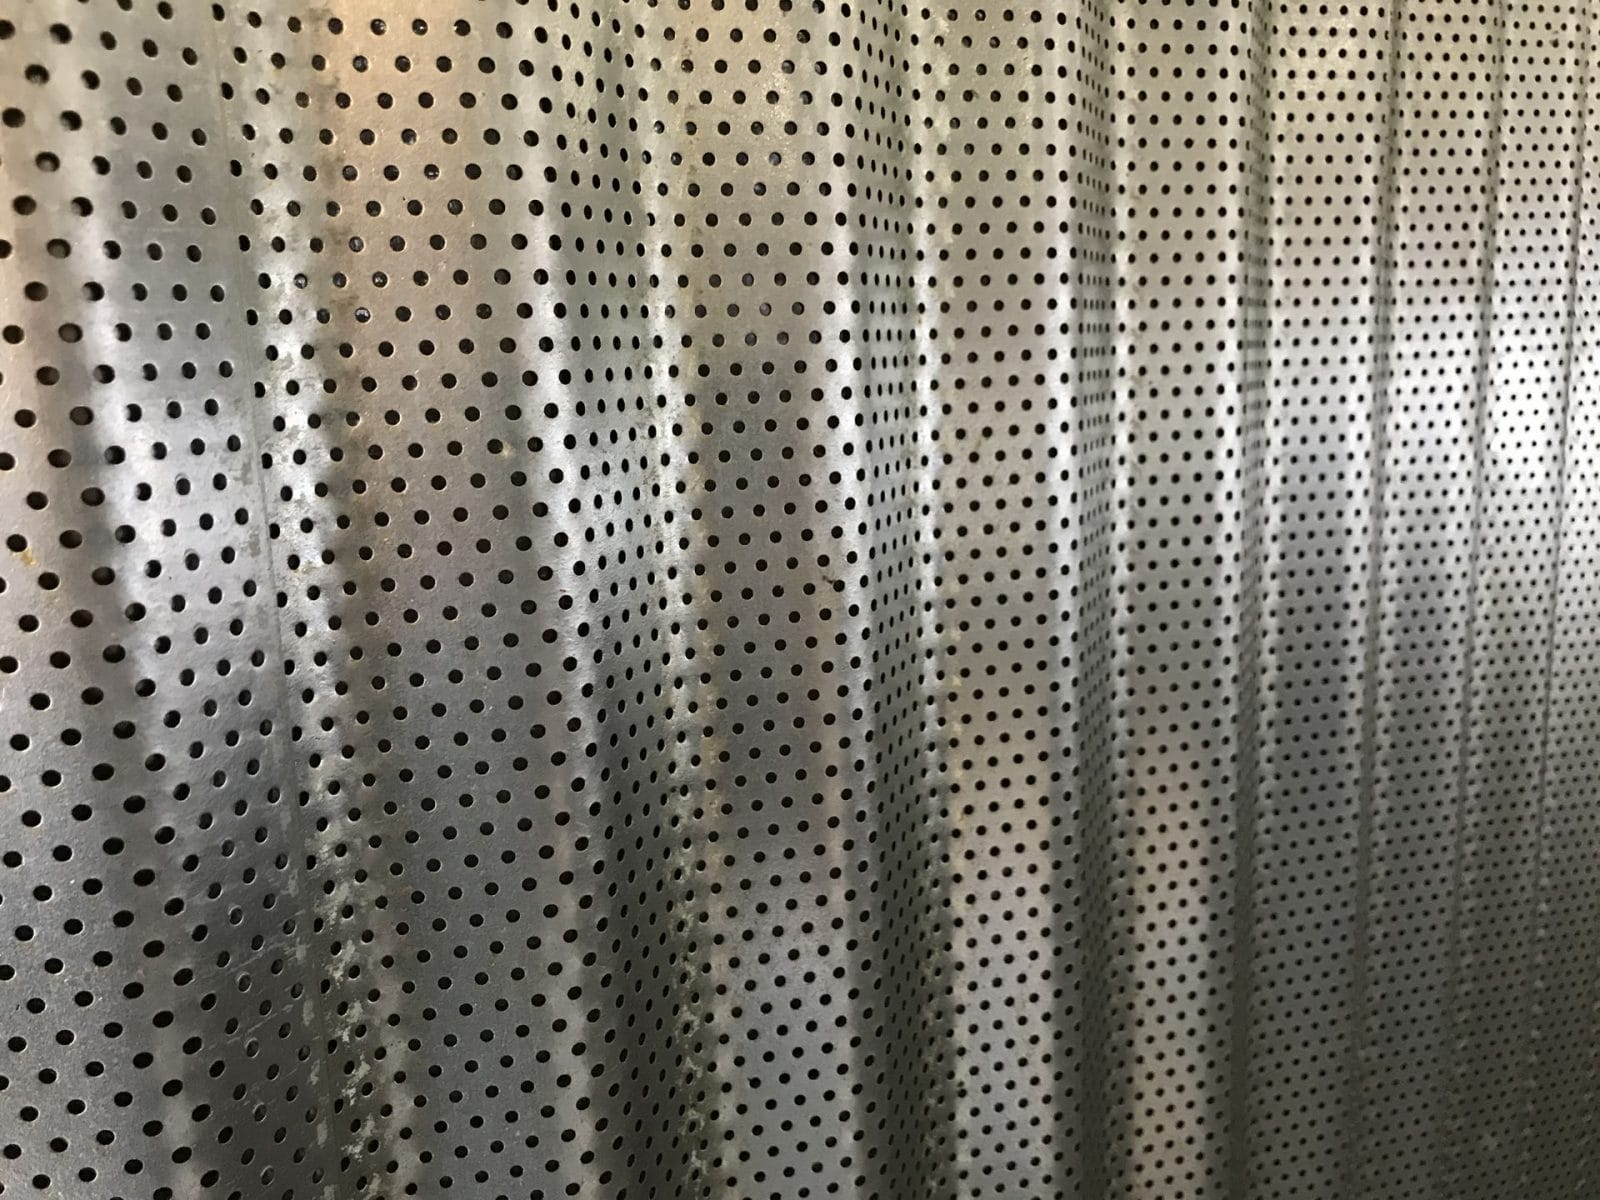 Perforated Metal Supplier nationwide, branko perforating michigan, metal perforating services